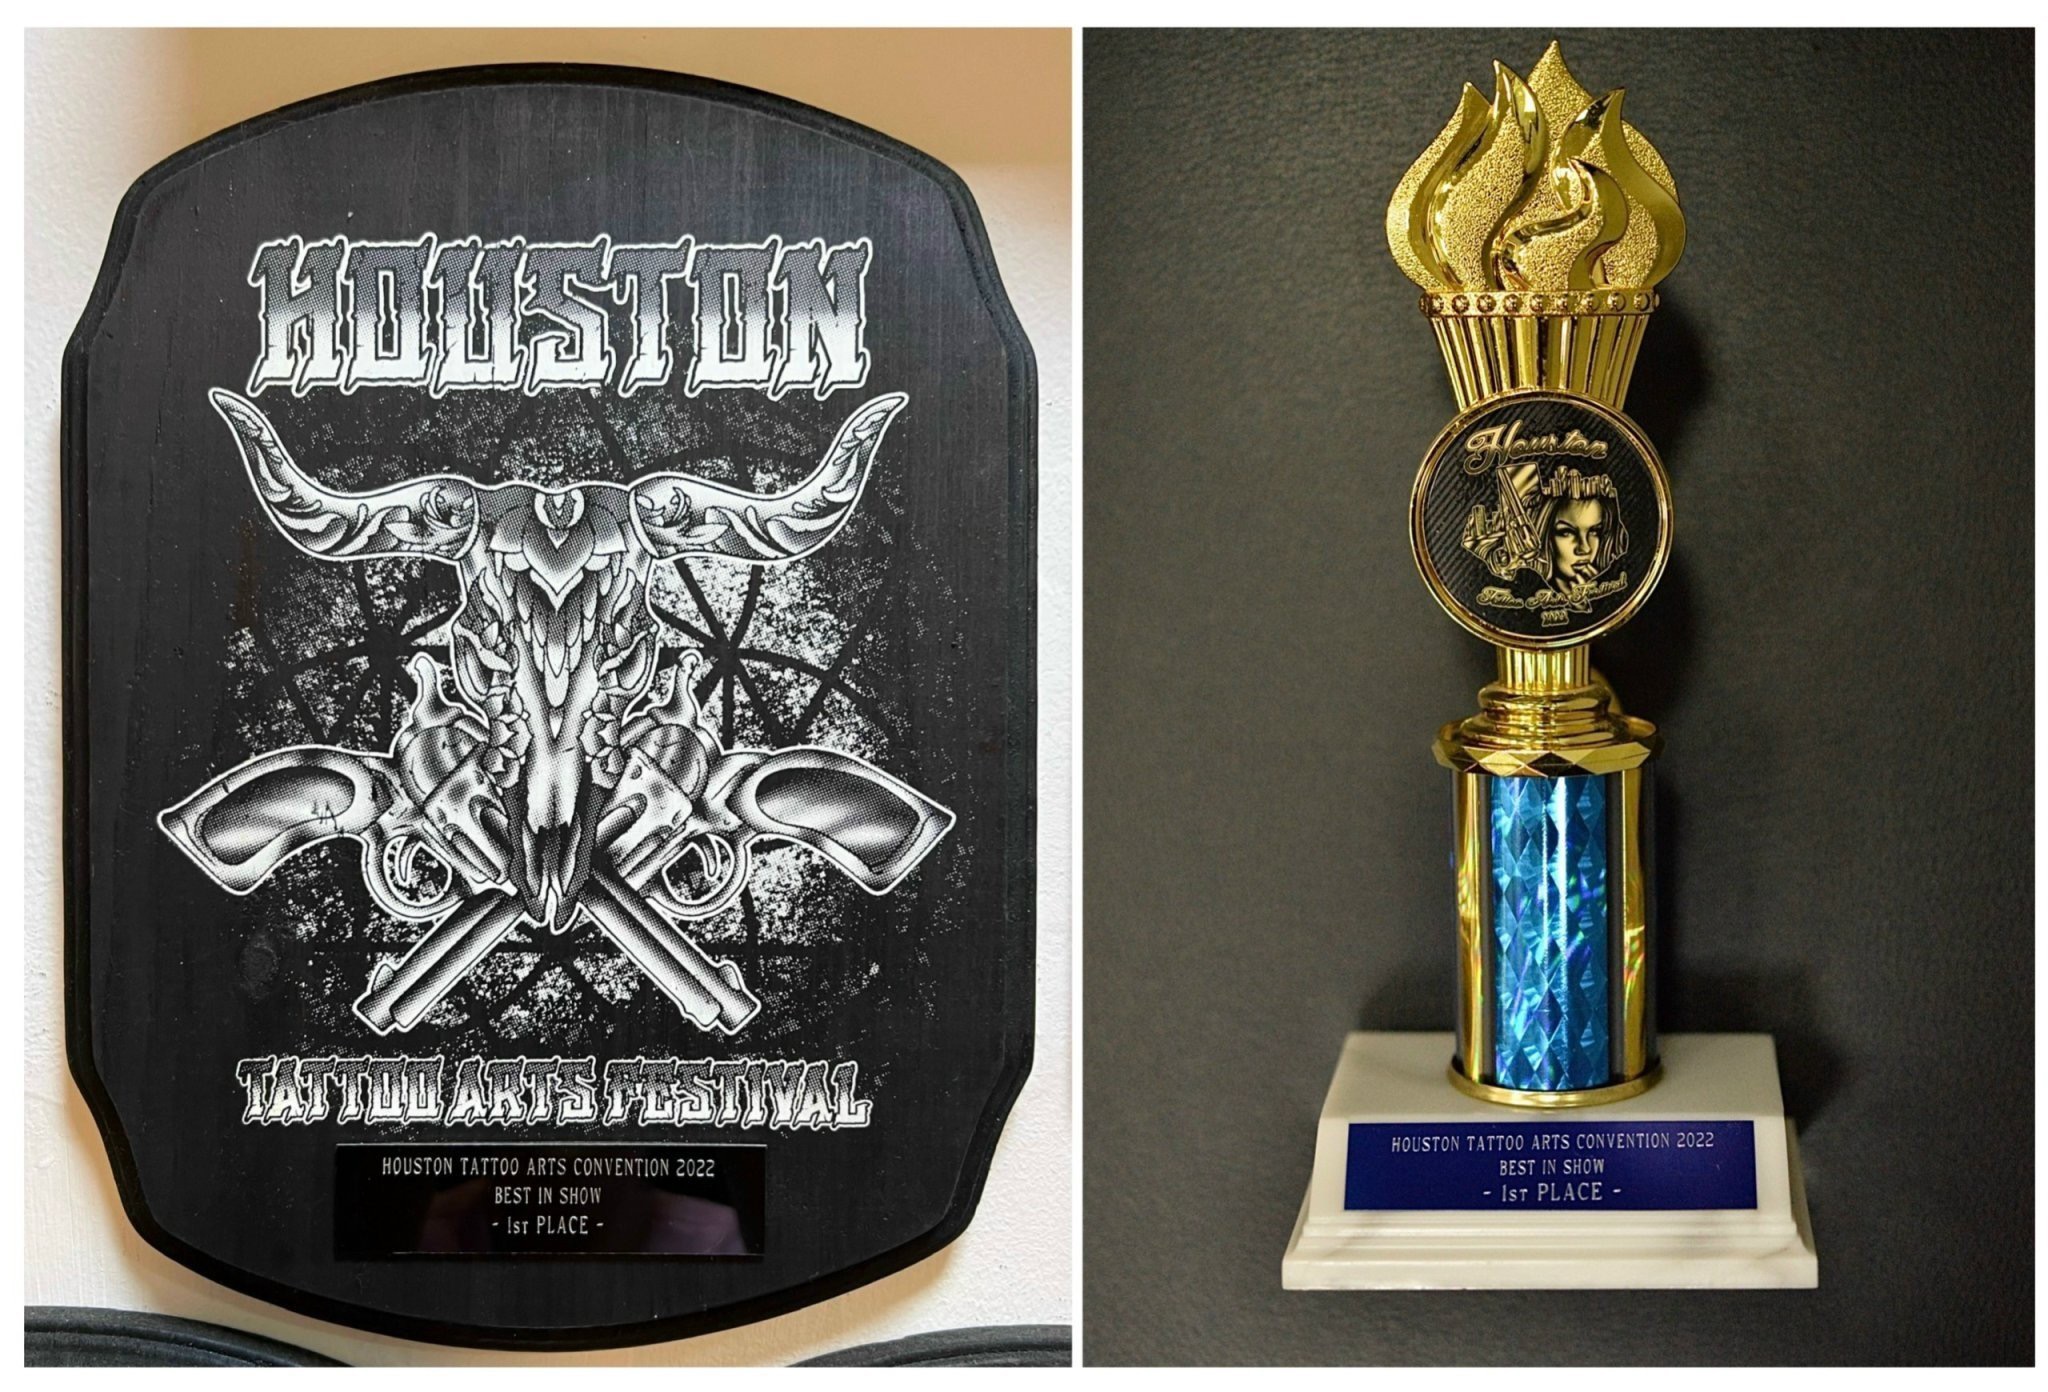 1 st Place - BEST IN SHOW  Tại The Houston Tattoo Art Festival 2022